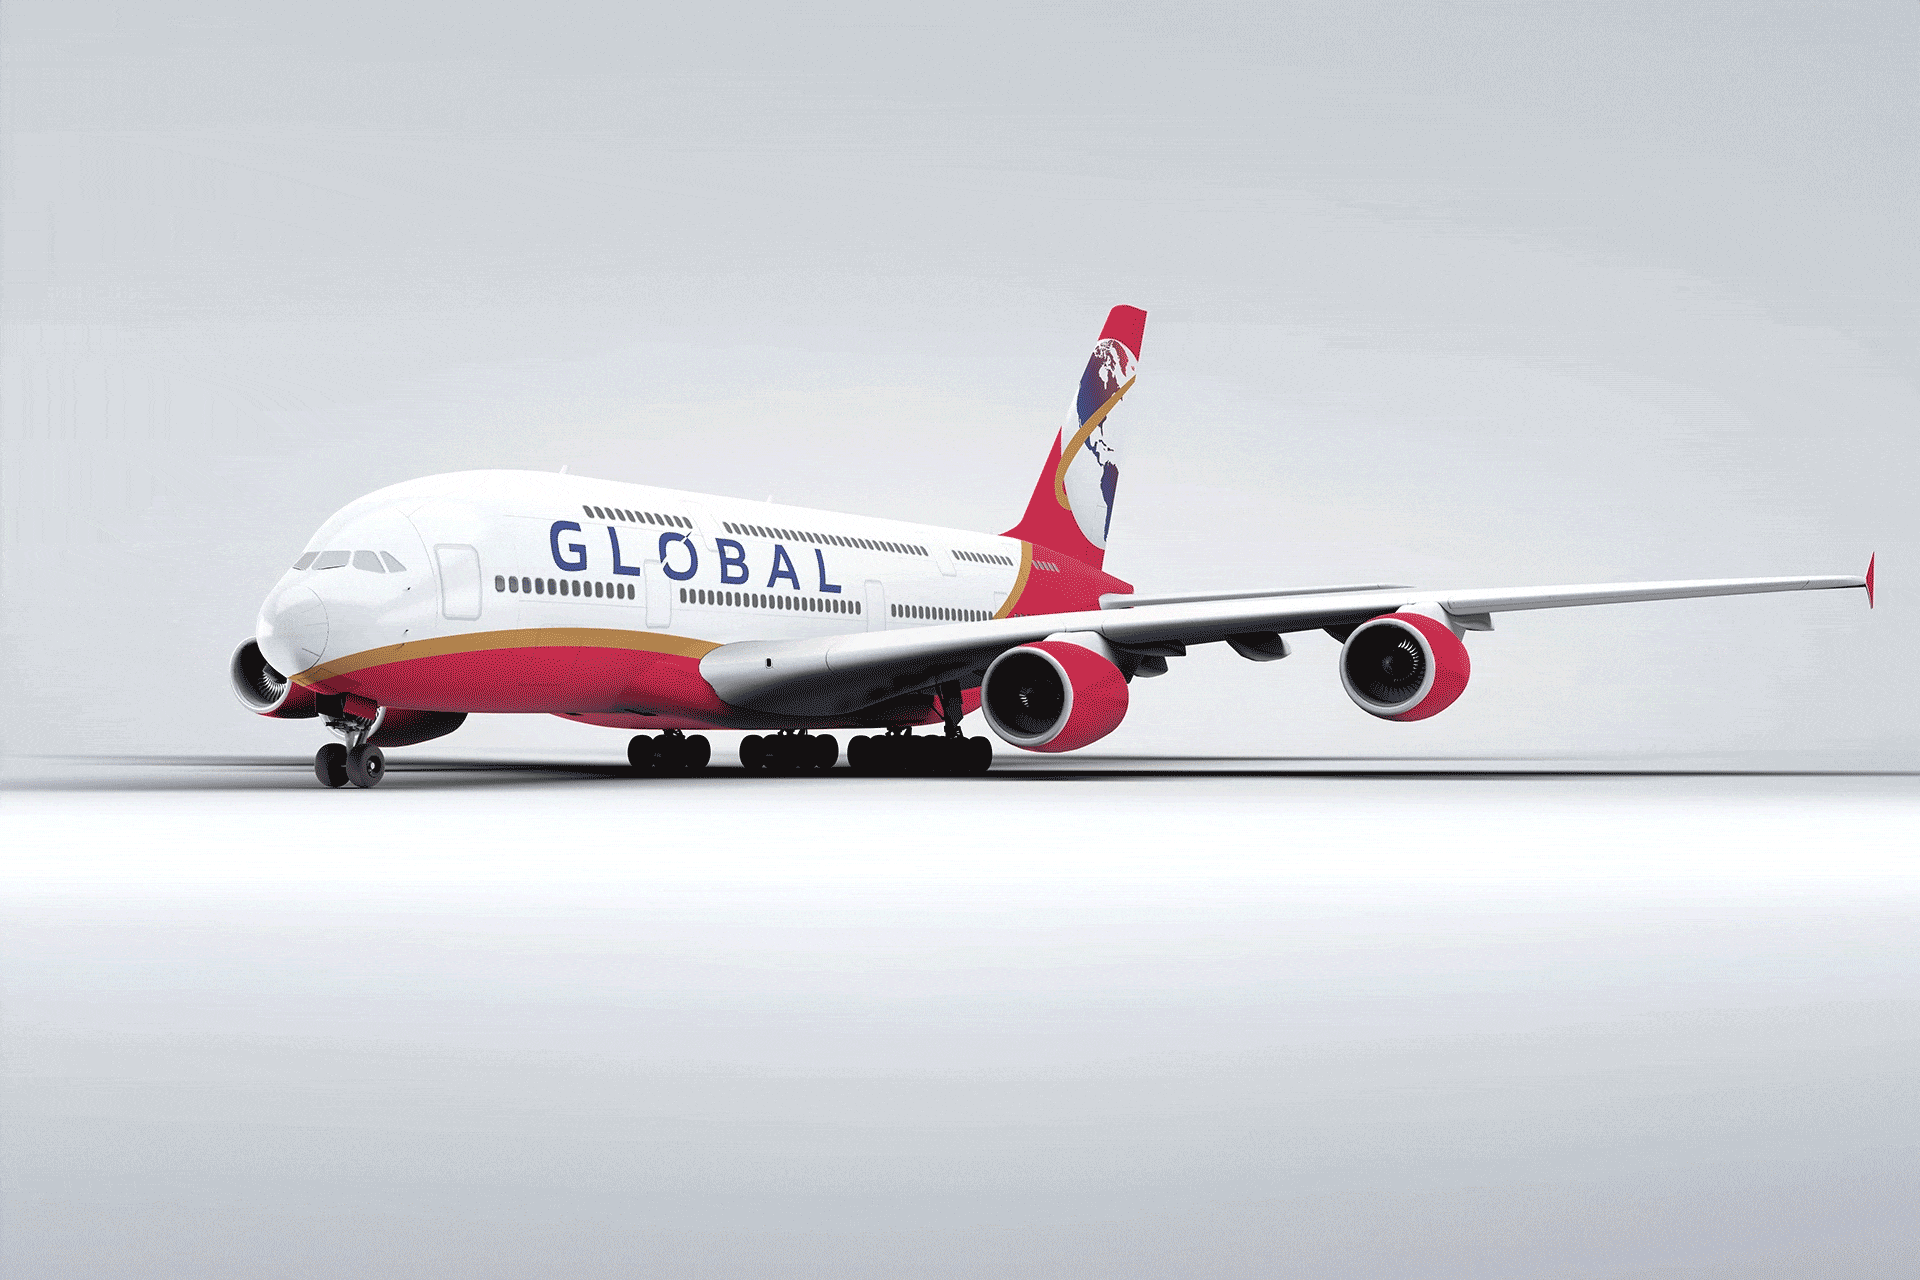 Global Airlines' Primary Livery Design